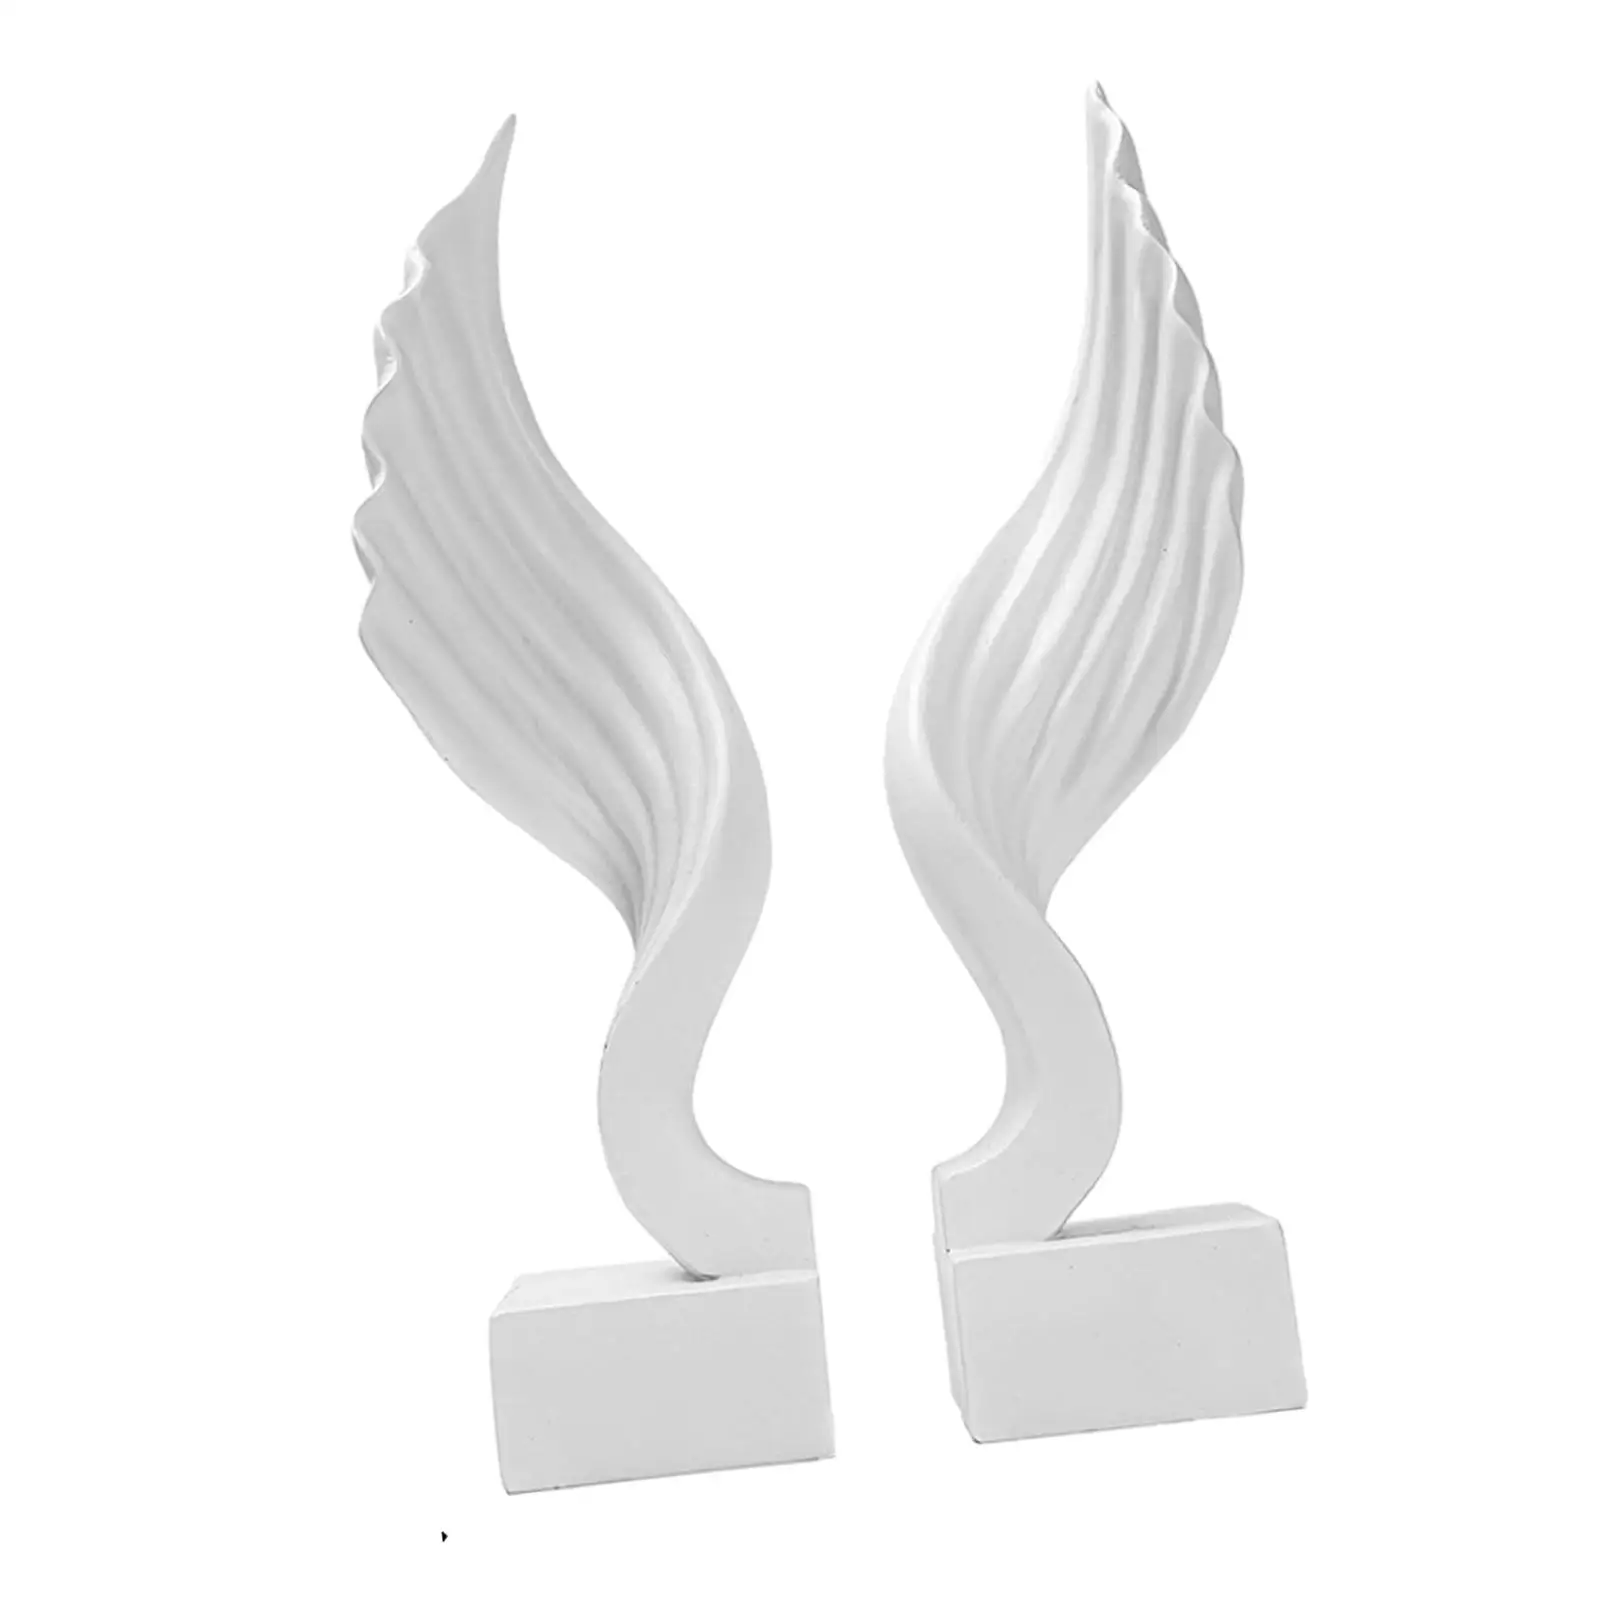 Angel Wing Book Stand Bookends Statue Decoration Functional Book Holders Resin Ornament for Library Desktop Decor Accessories